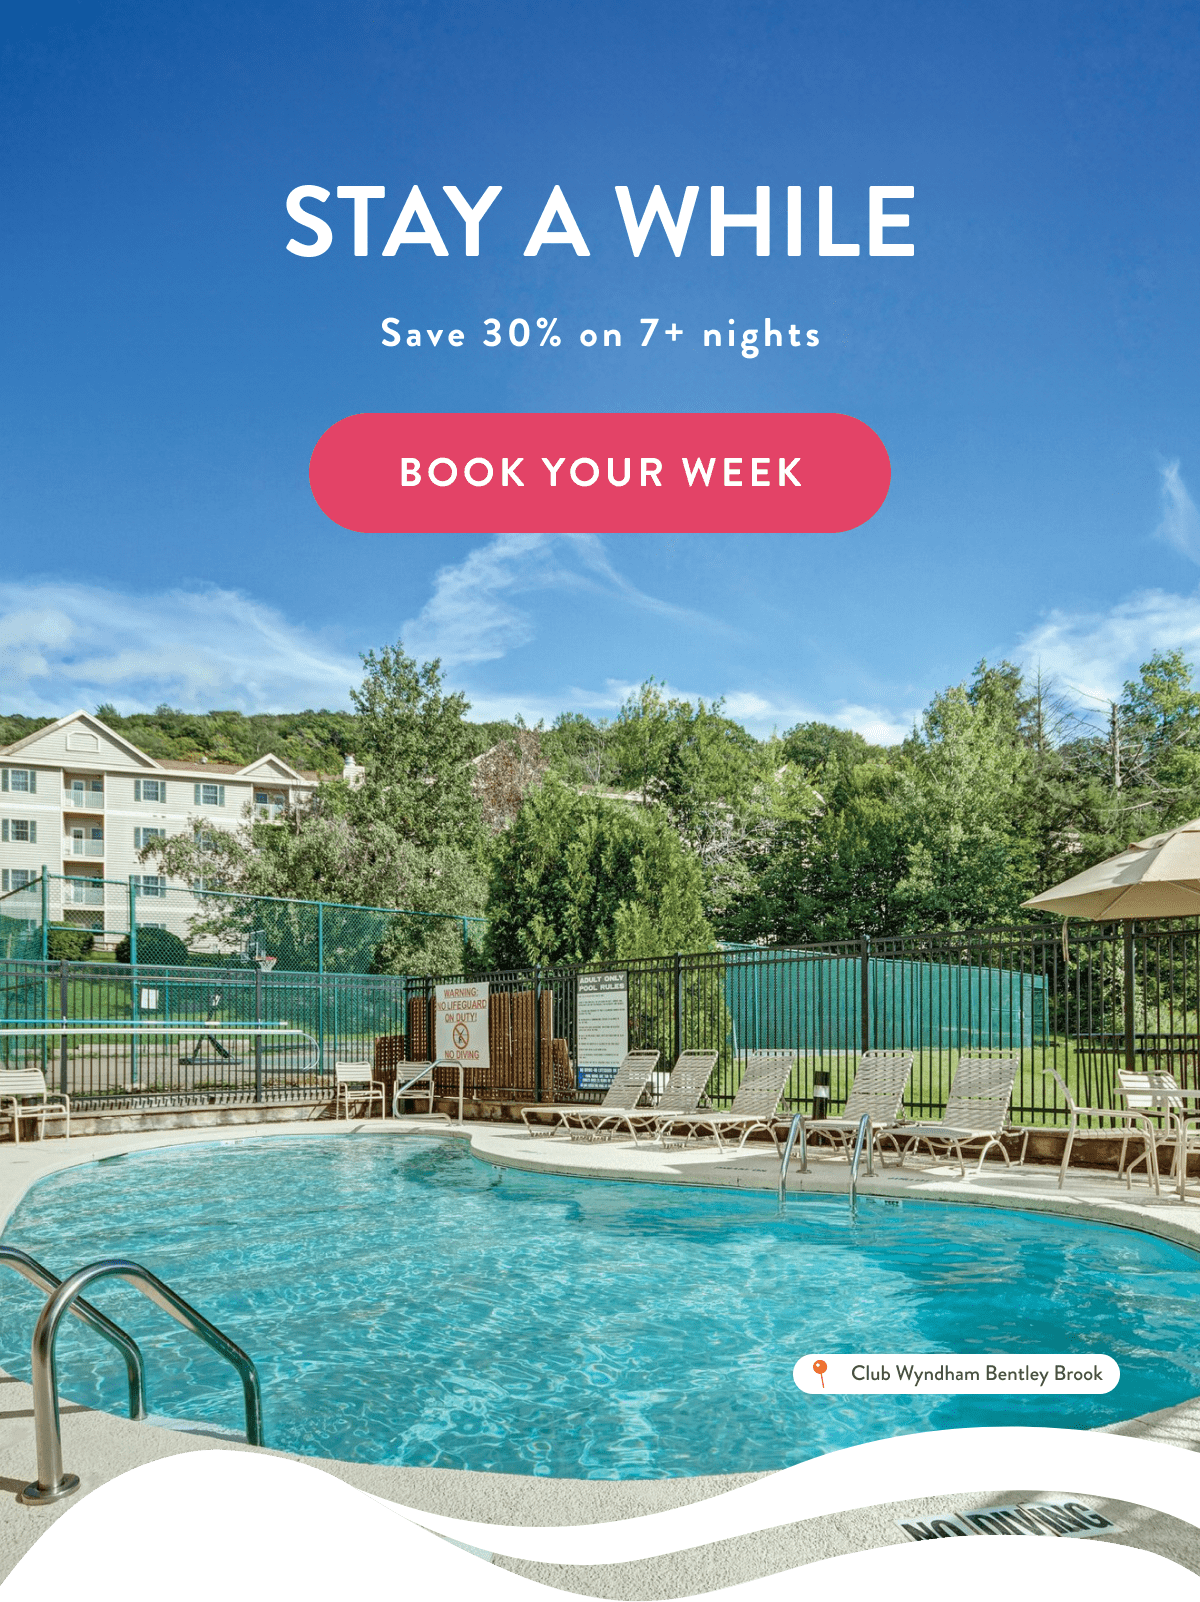 STAY A WHILE | BOOK YOUR WEEK